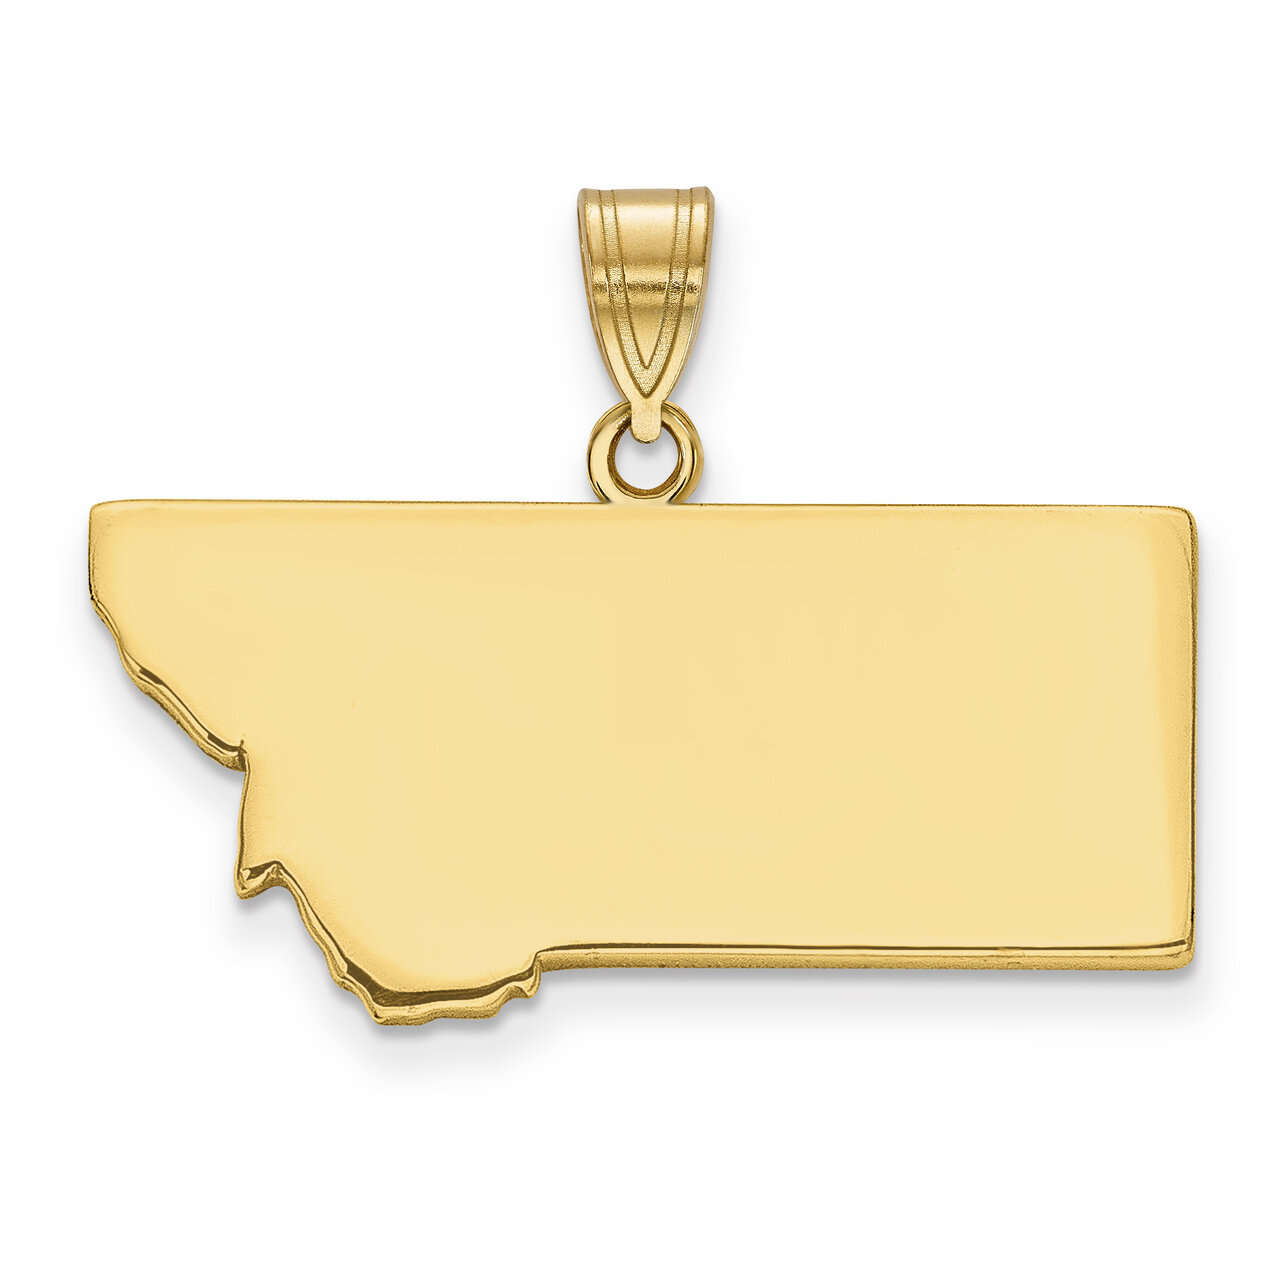 Montana State Pendant Charm Gold-plated on Silver Engravable XNA707GP-MT